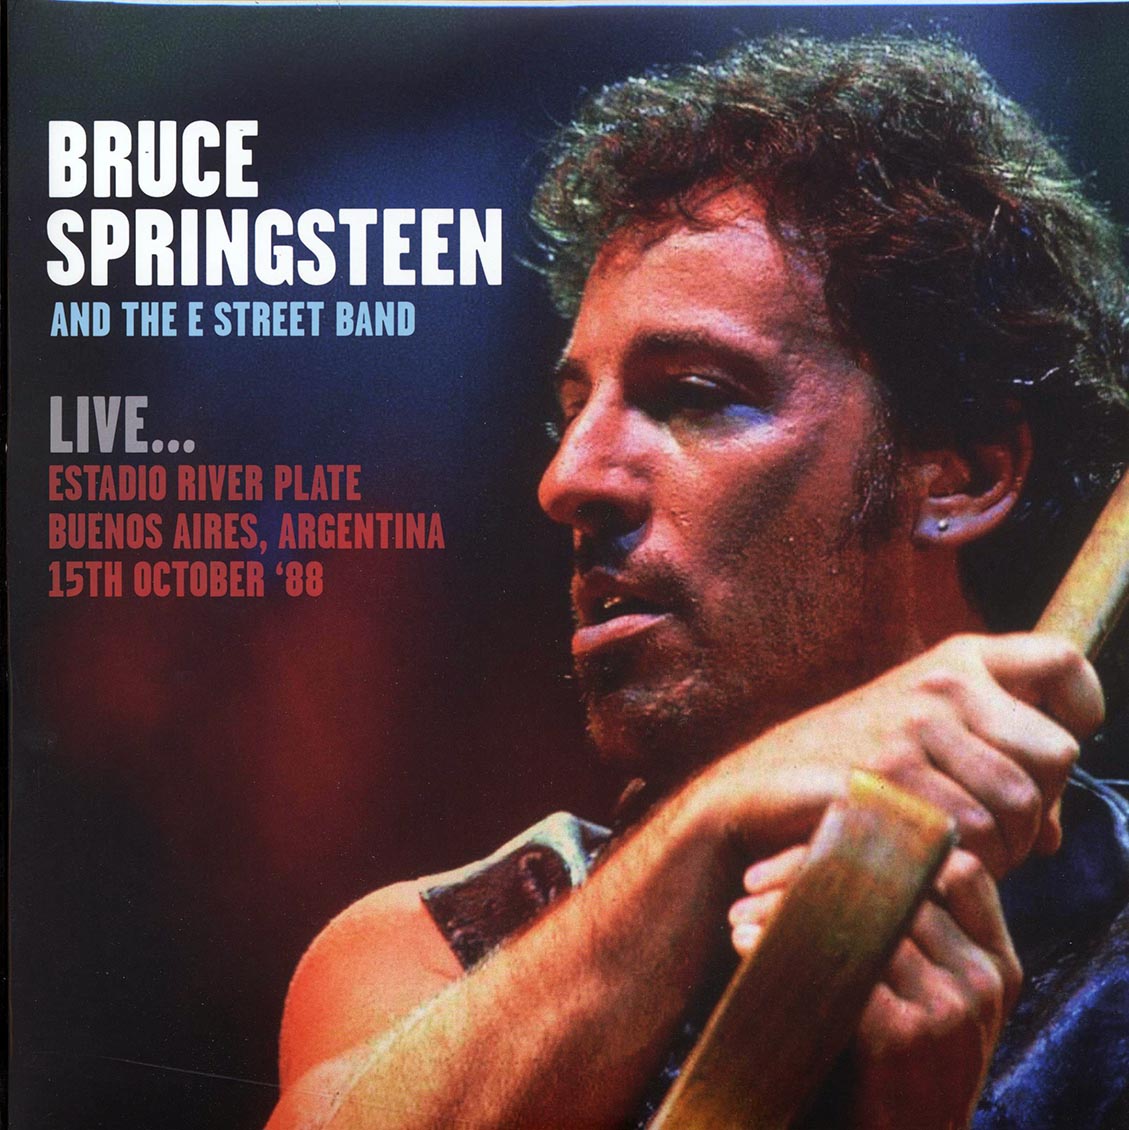 Bruce Springsteen & The E Street Band - Live Estadio River Plate, Buenos Aires, Argentina 15th October 1988 (180g) - Vinyl LP